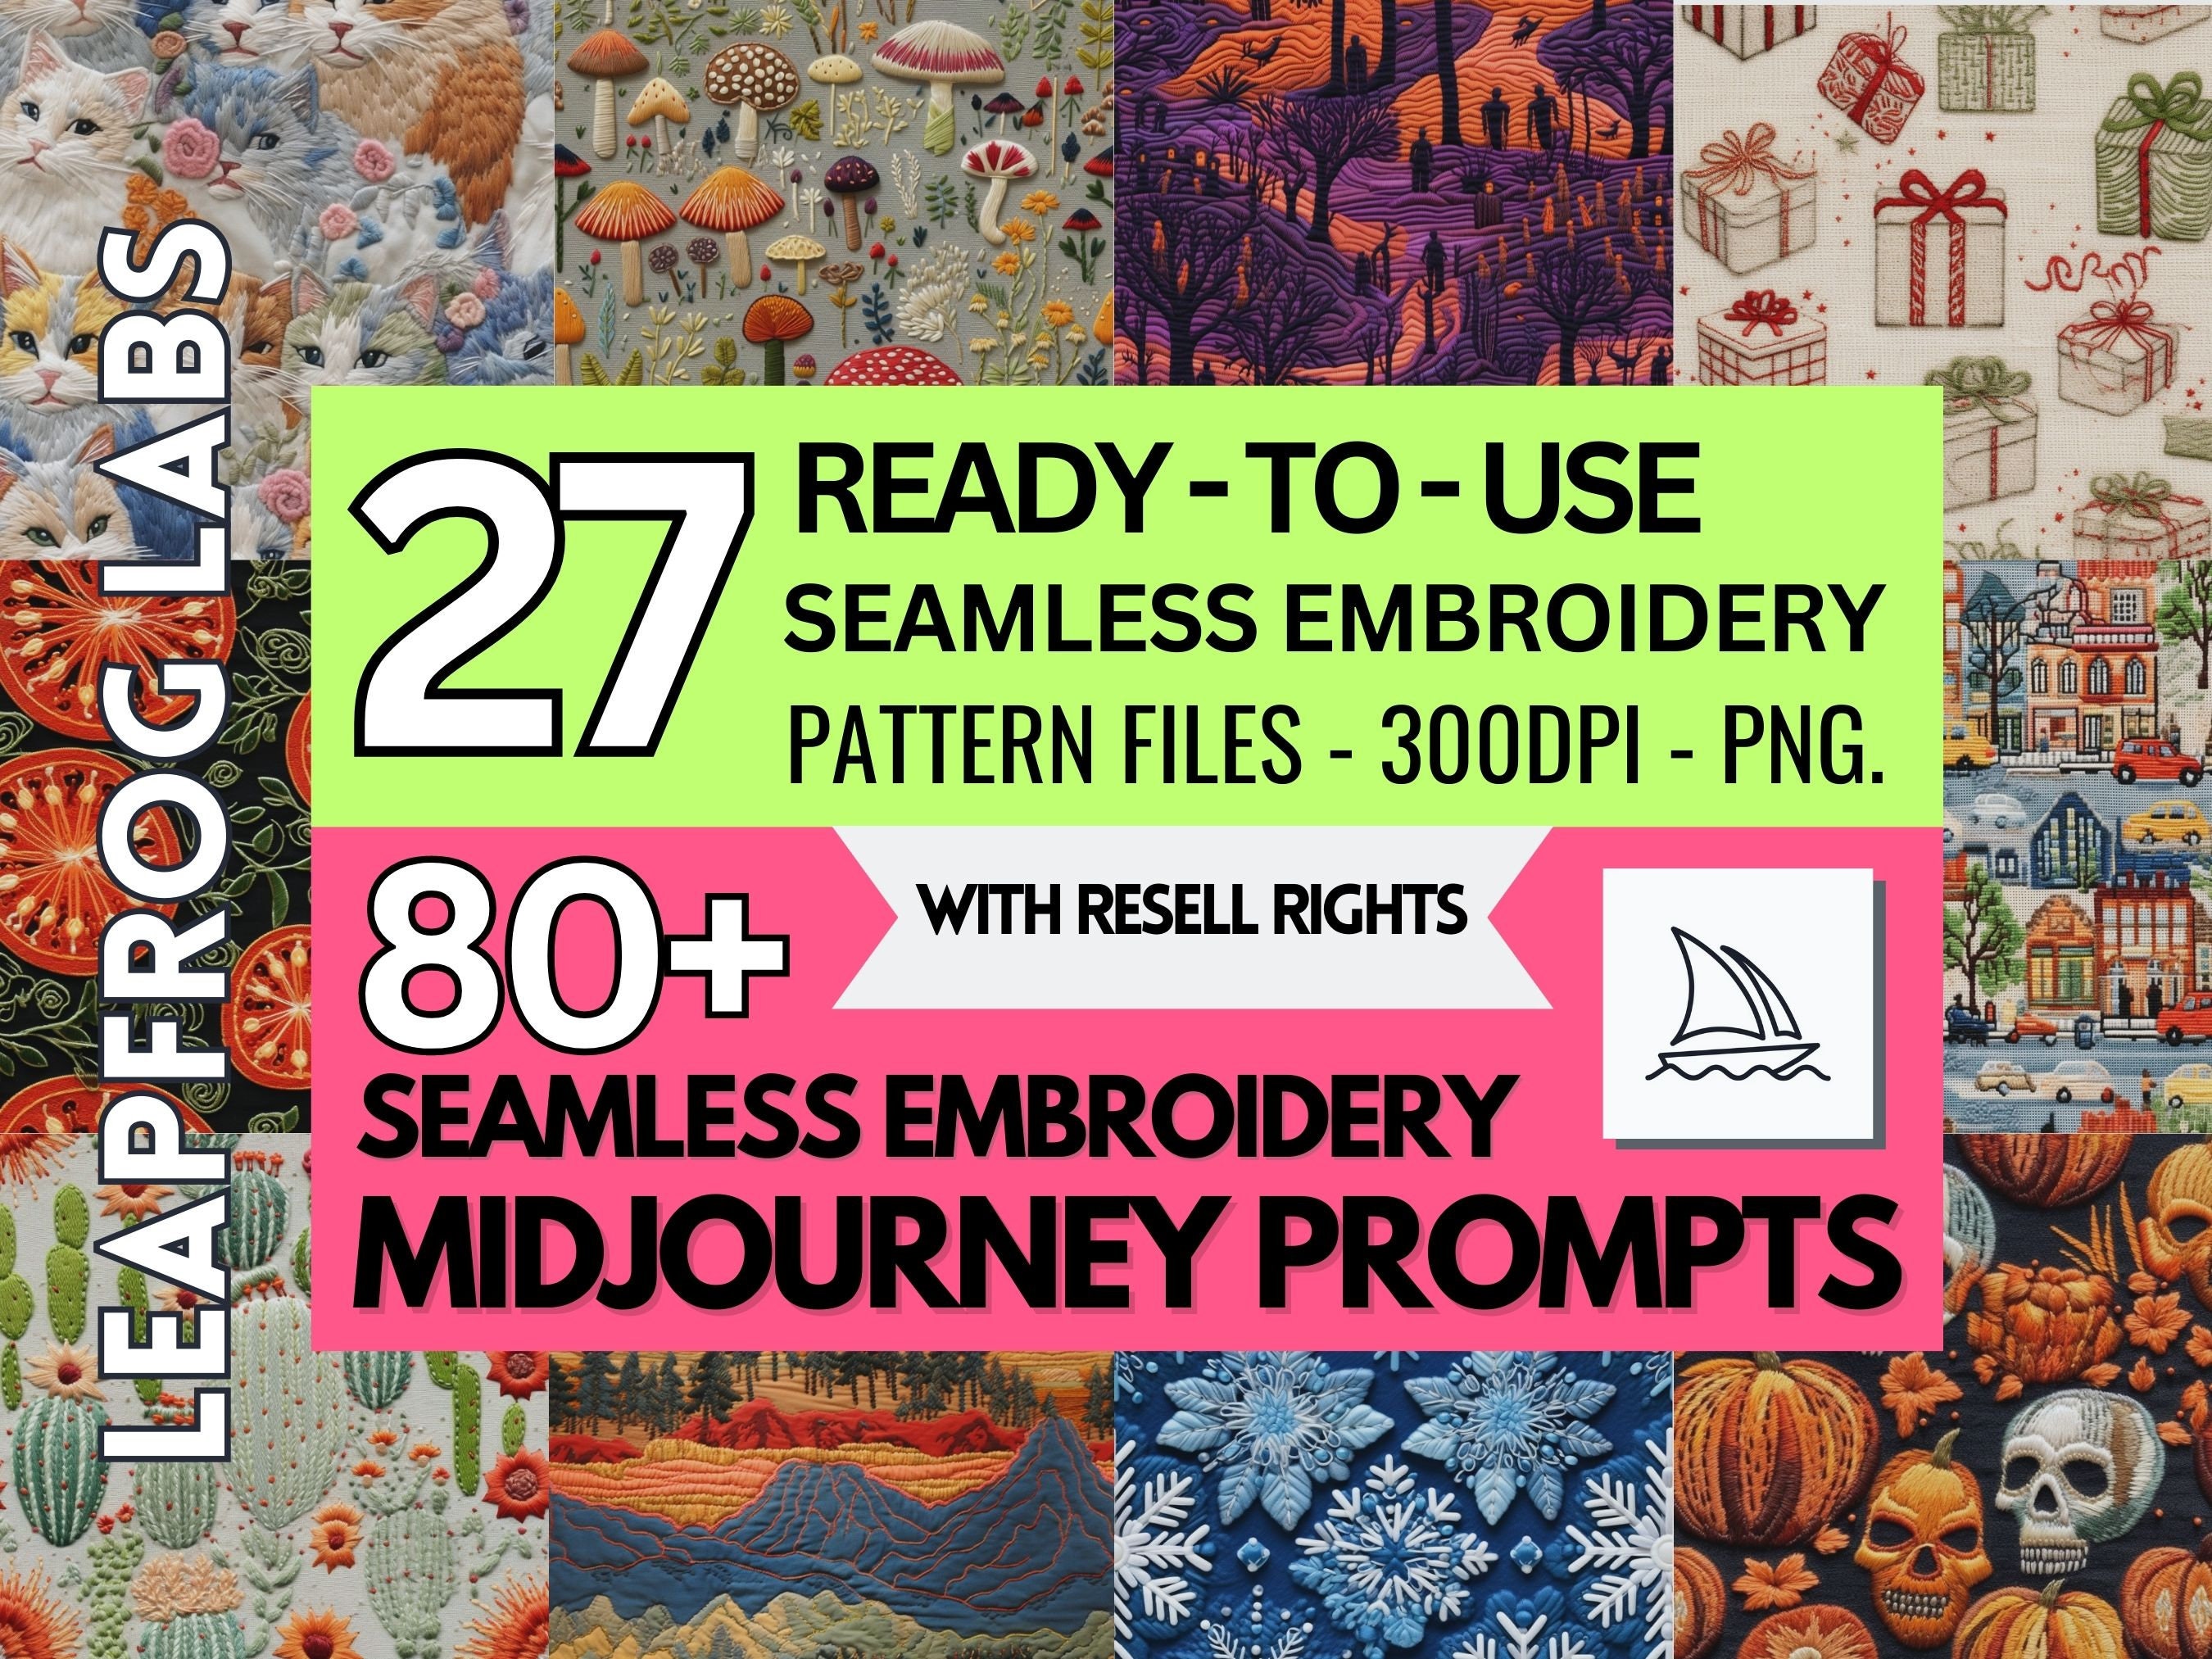 Nearly Free Vintage Embroidery Books (Vol 2), Digital Download, PDF Files,  7 Books for 99 cents. That's less than 15 cents each!